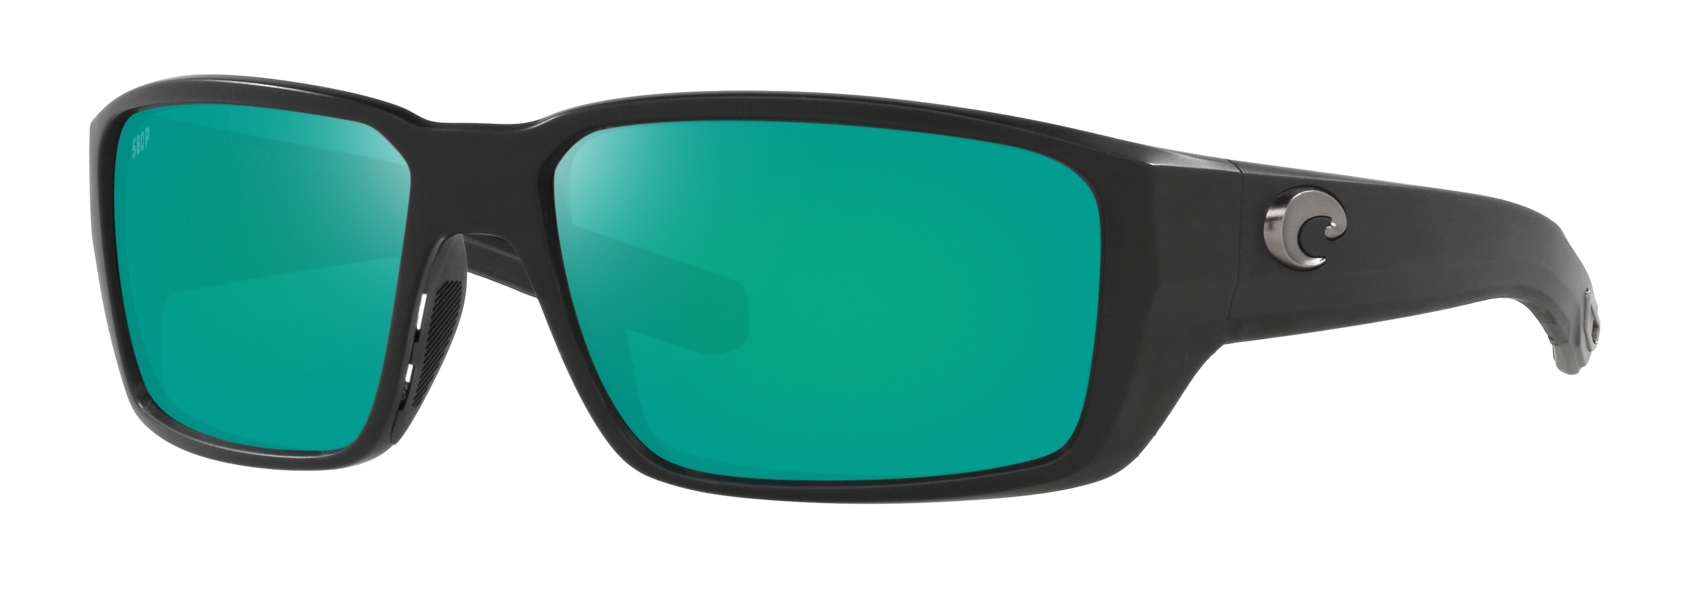 Costa Fantail Pro mens sunglassesin Matte Black with gray lenses and green mirror coating 